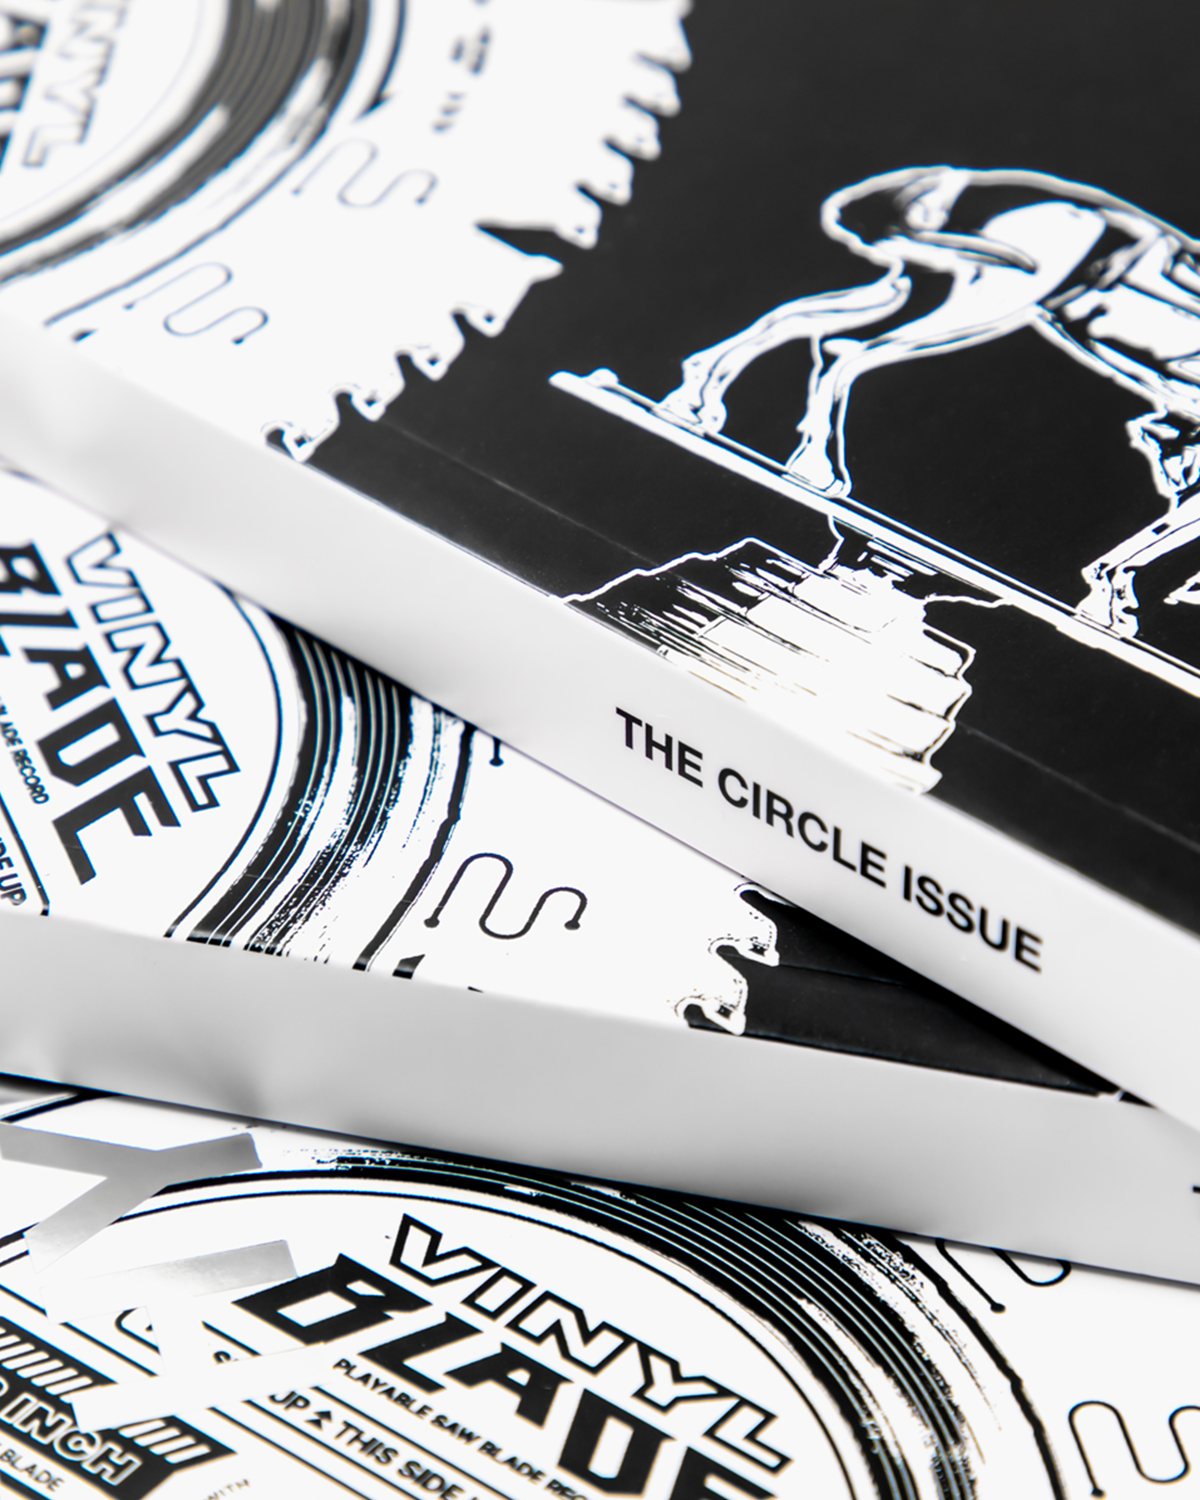 Hypebeast Magazine Issue 31: The Circle Issue